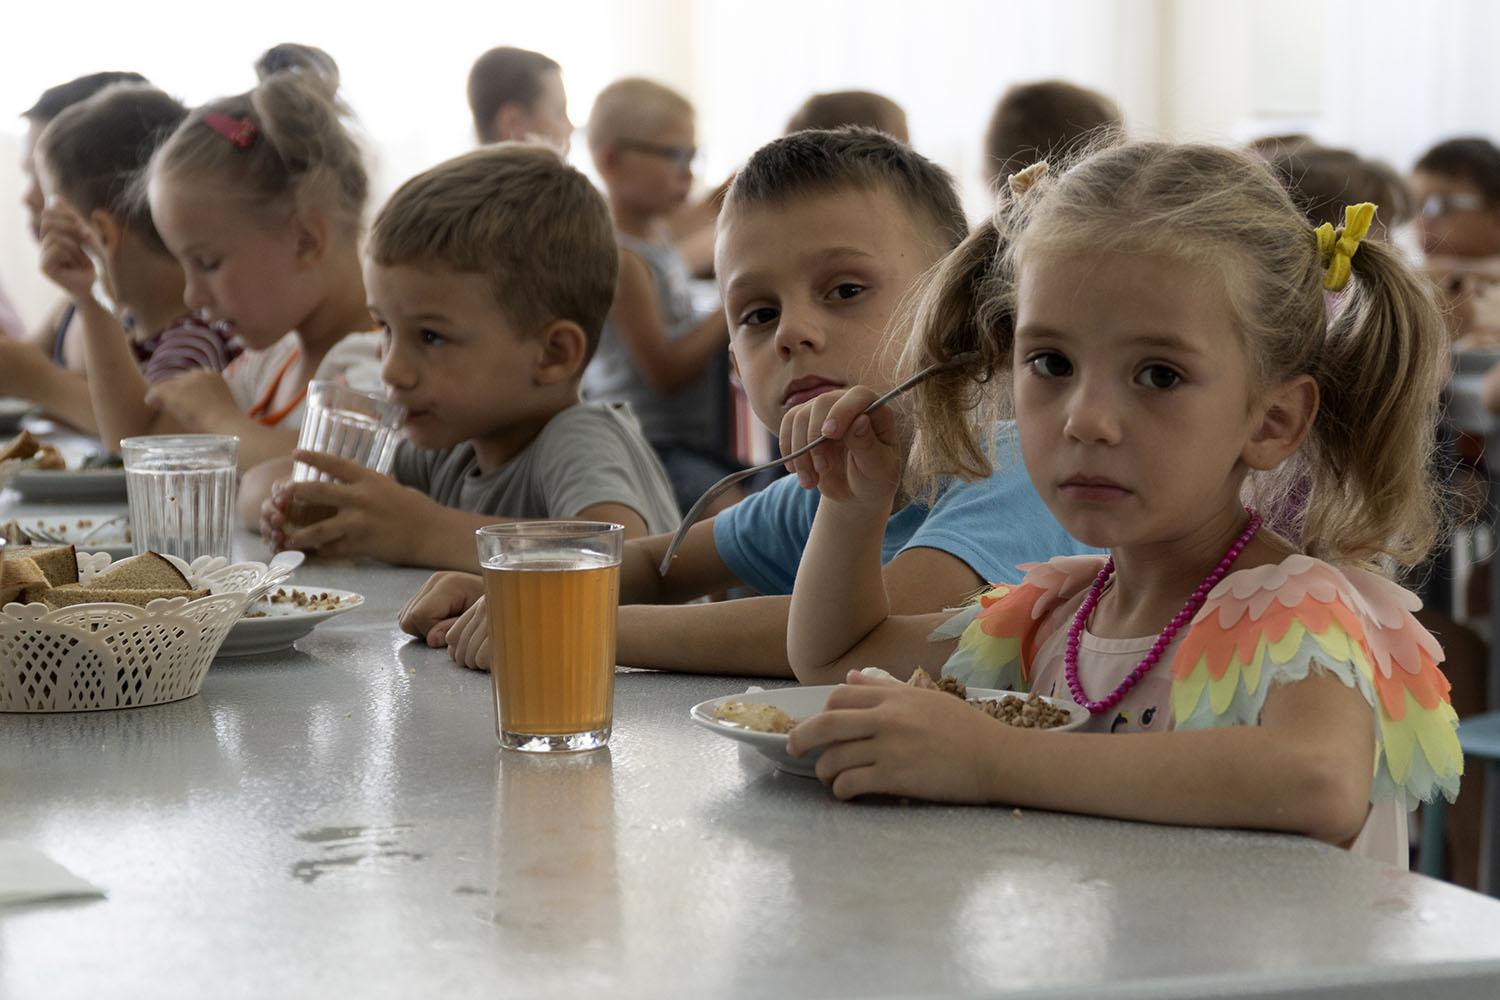 How Russian children are taken from Ukraine by Moscow?